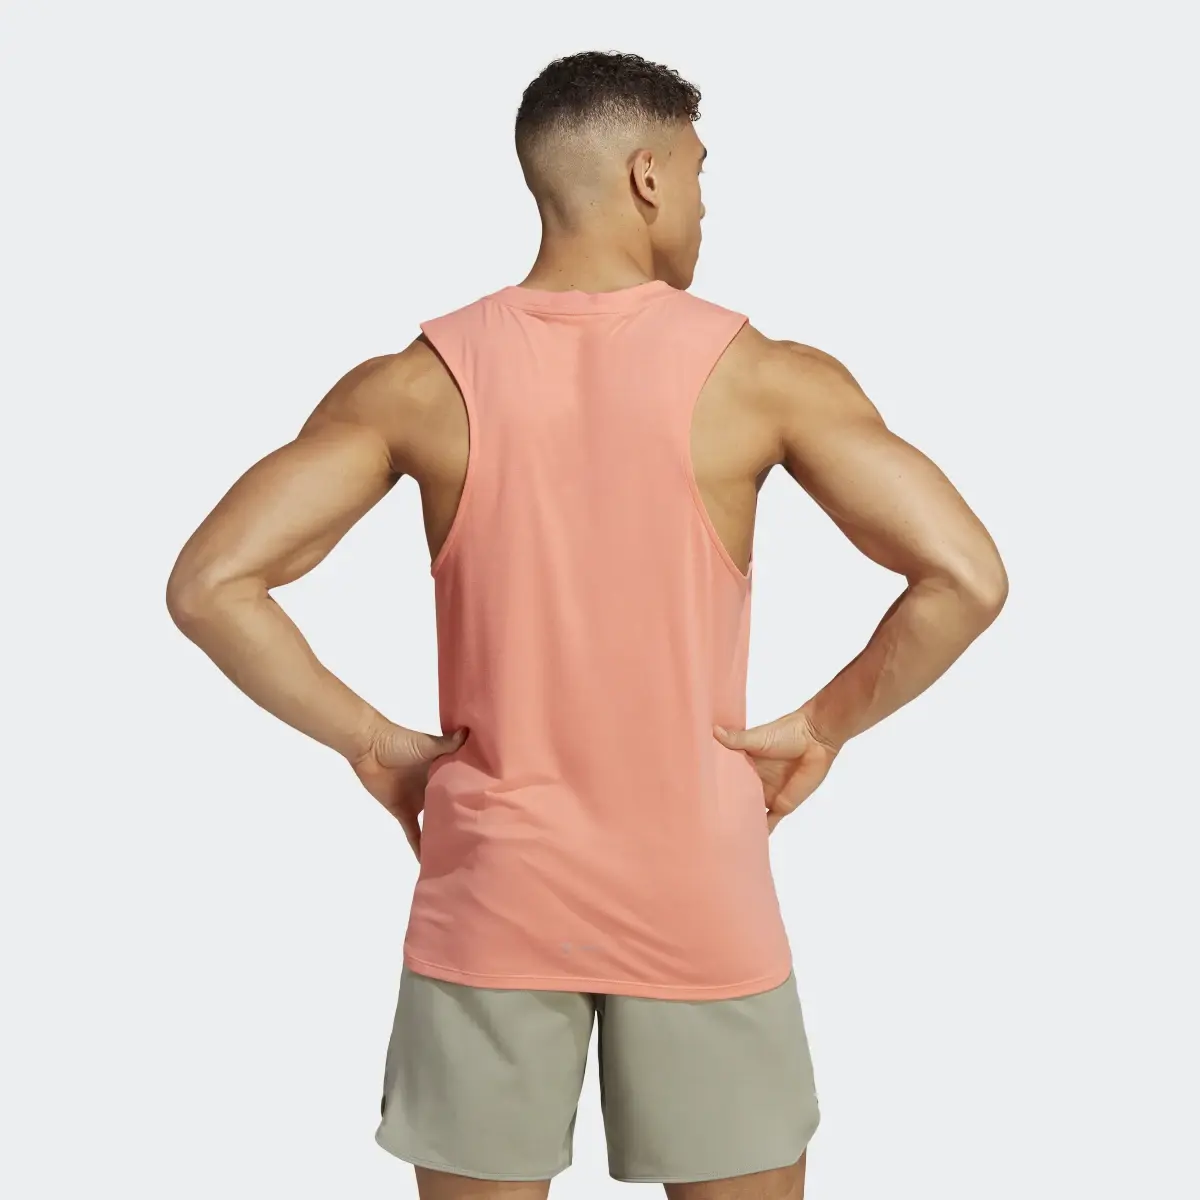 Adidas Designed for Training Workout Tanktop. 3